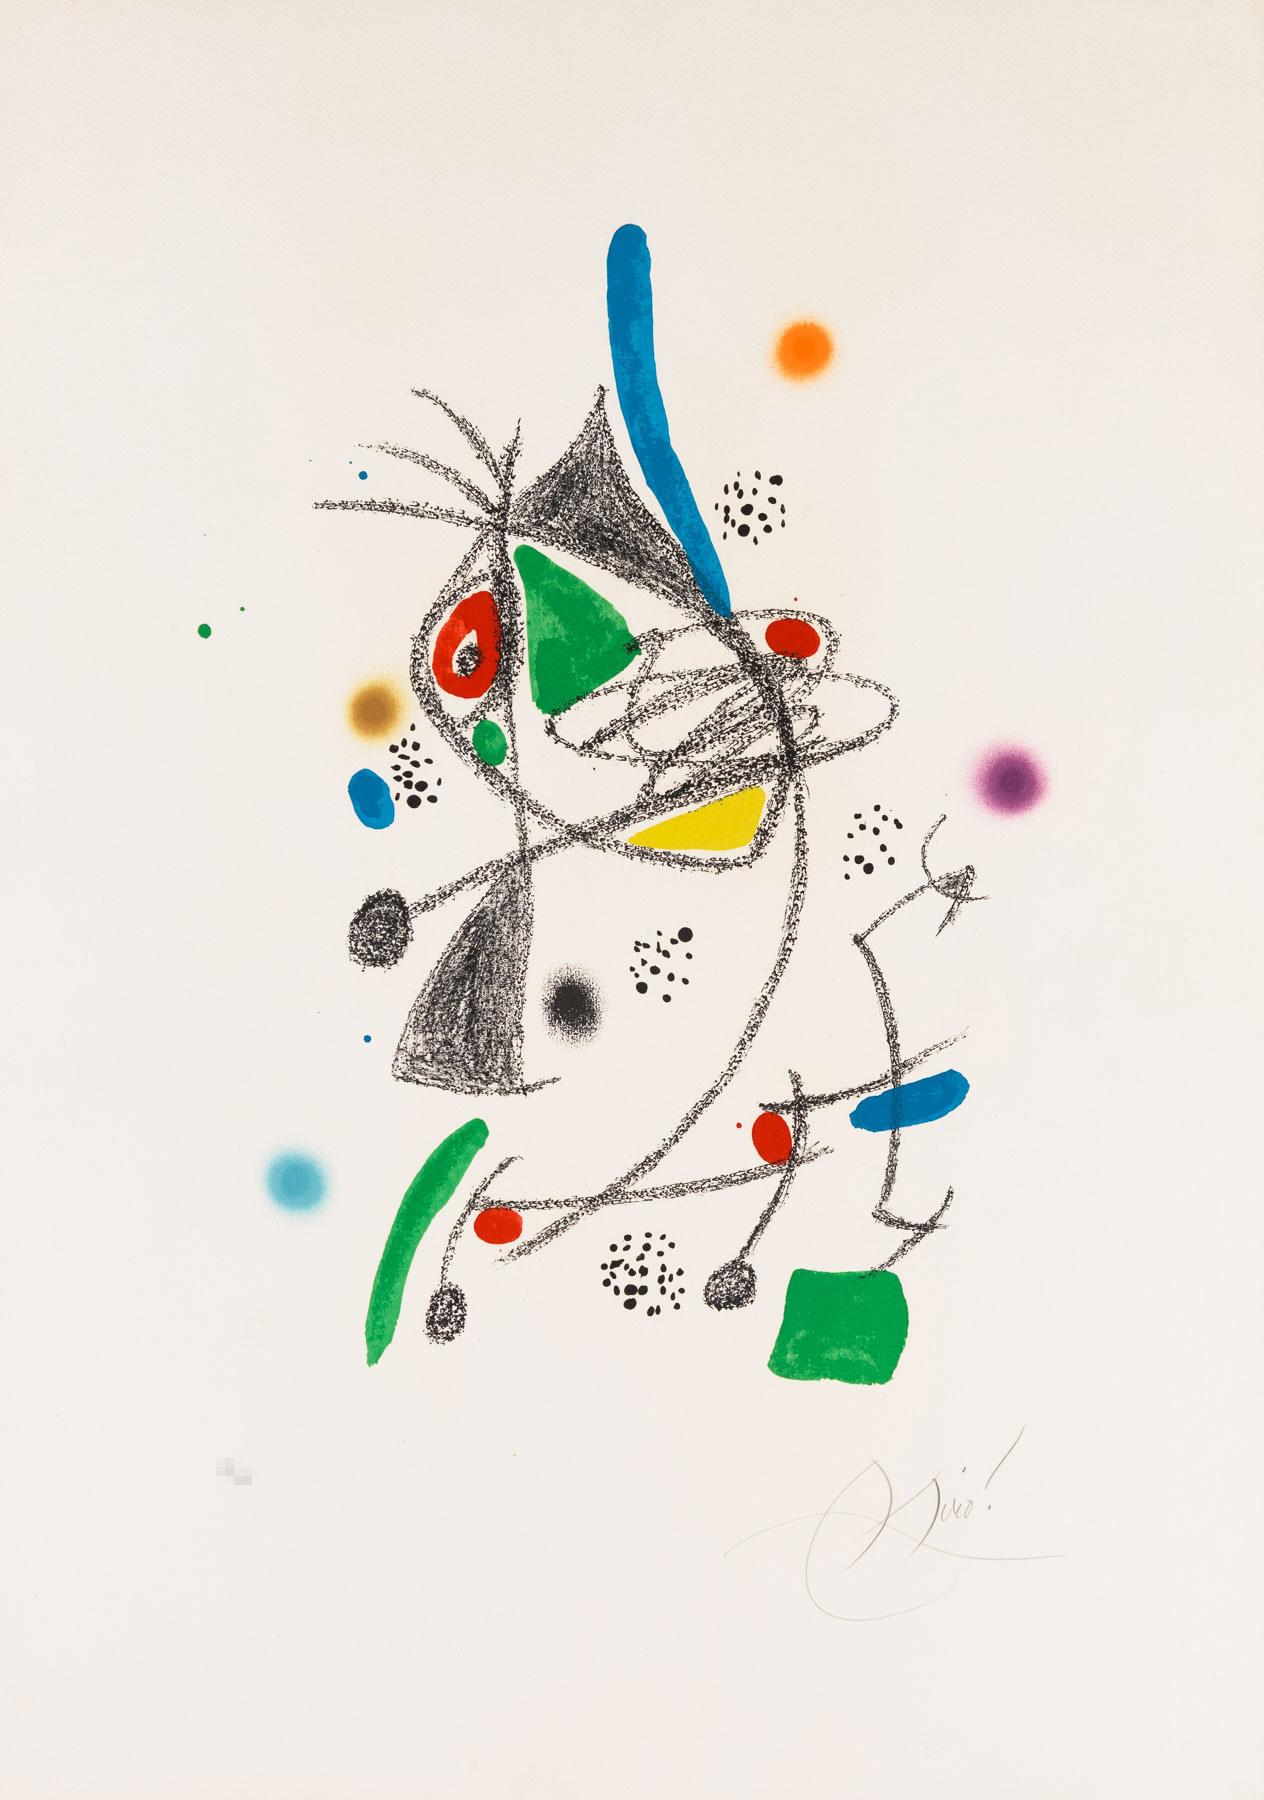 Joan Miró Abstract Print - Untitled from Wonders with Acrostic Variations in the Garden of Miró